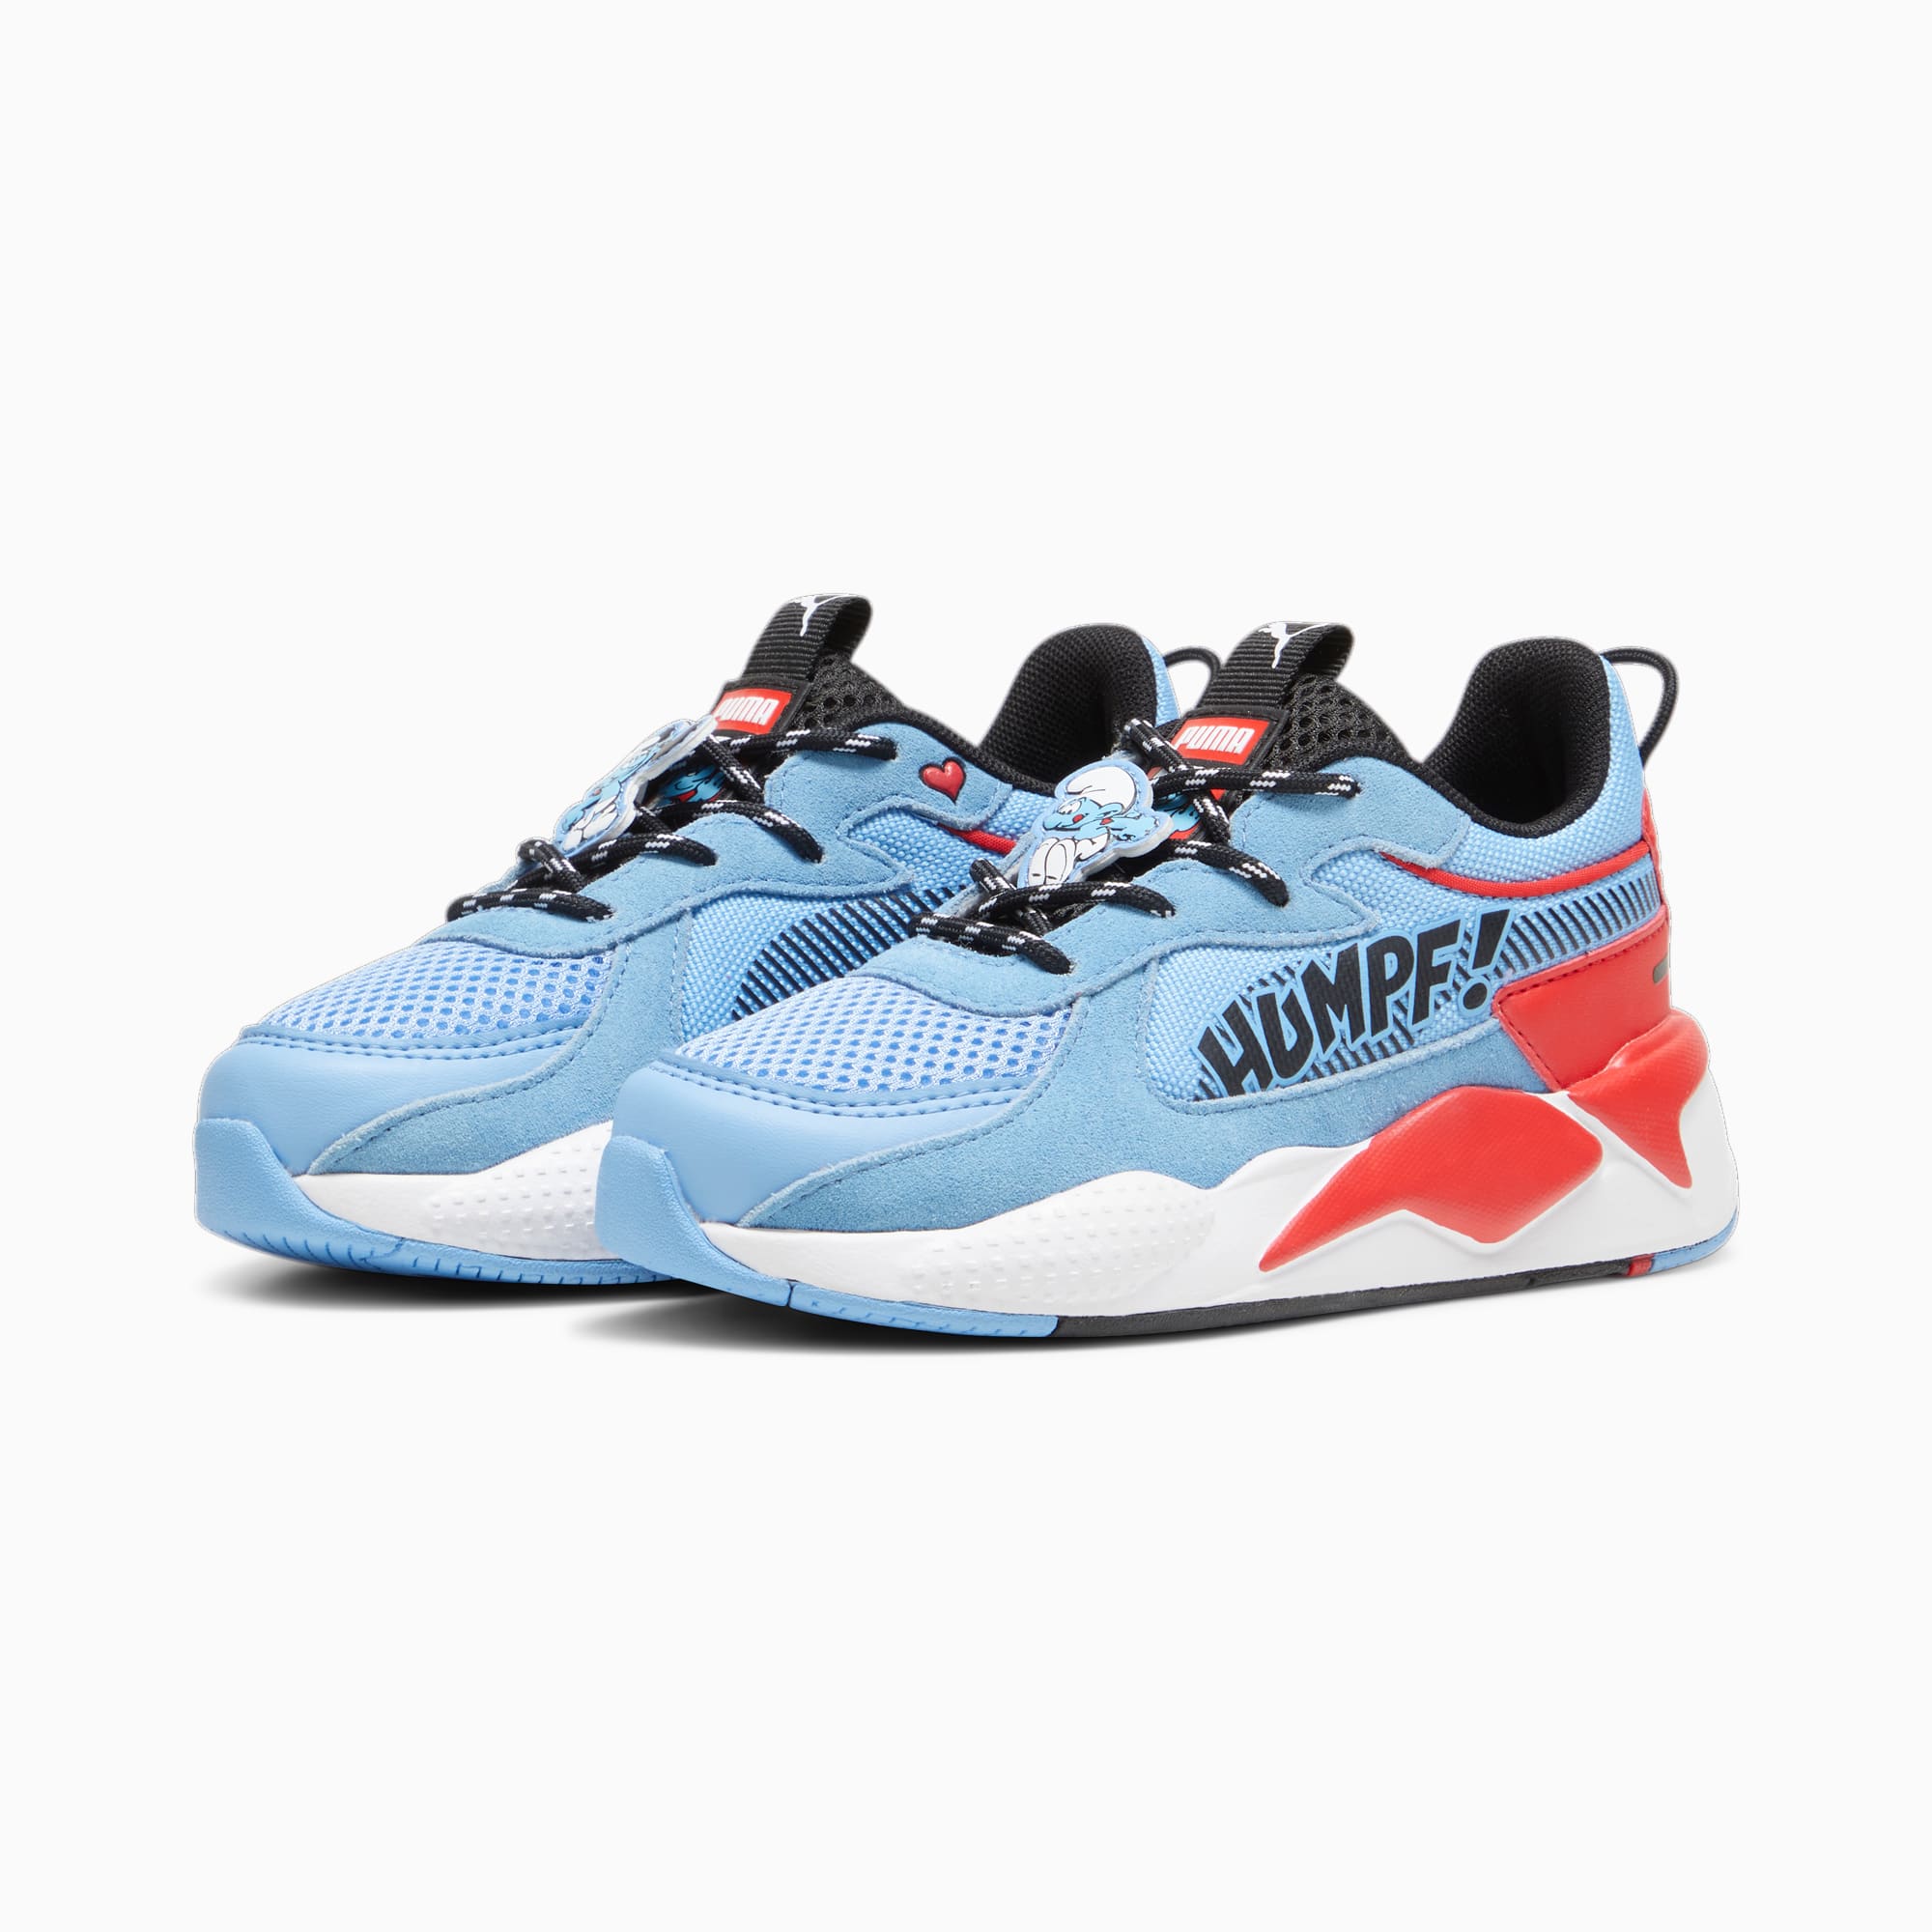 PUMA x THE SMURFS RS-X Little Kids' Sneakers